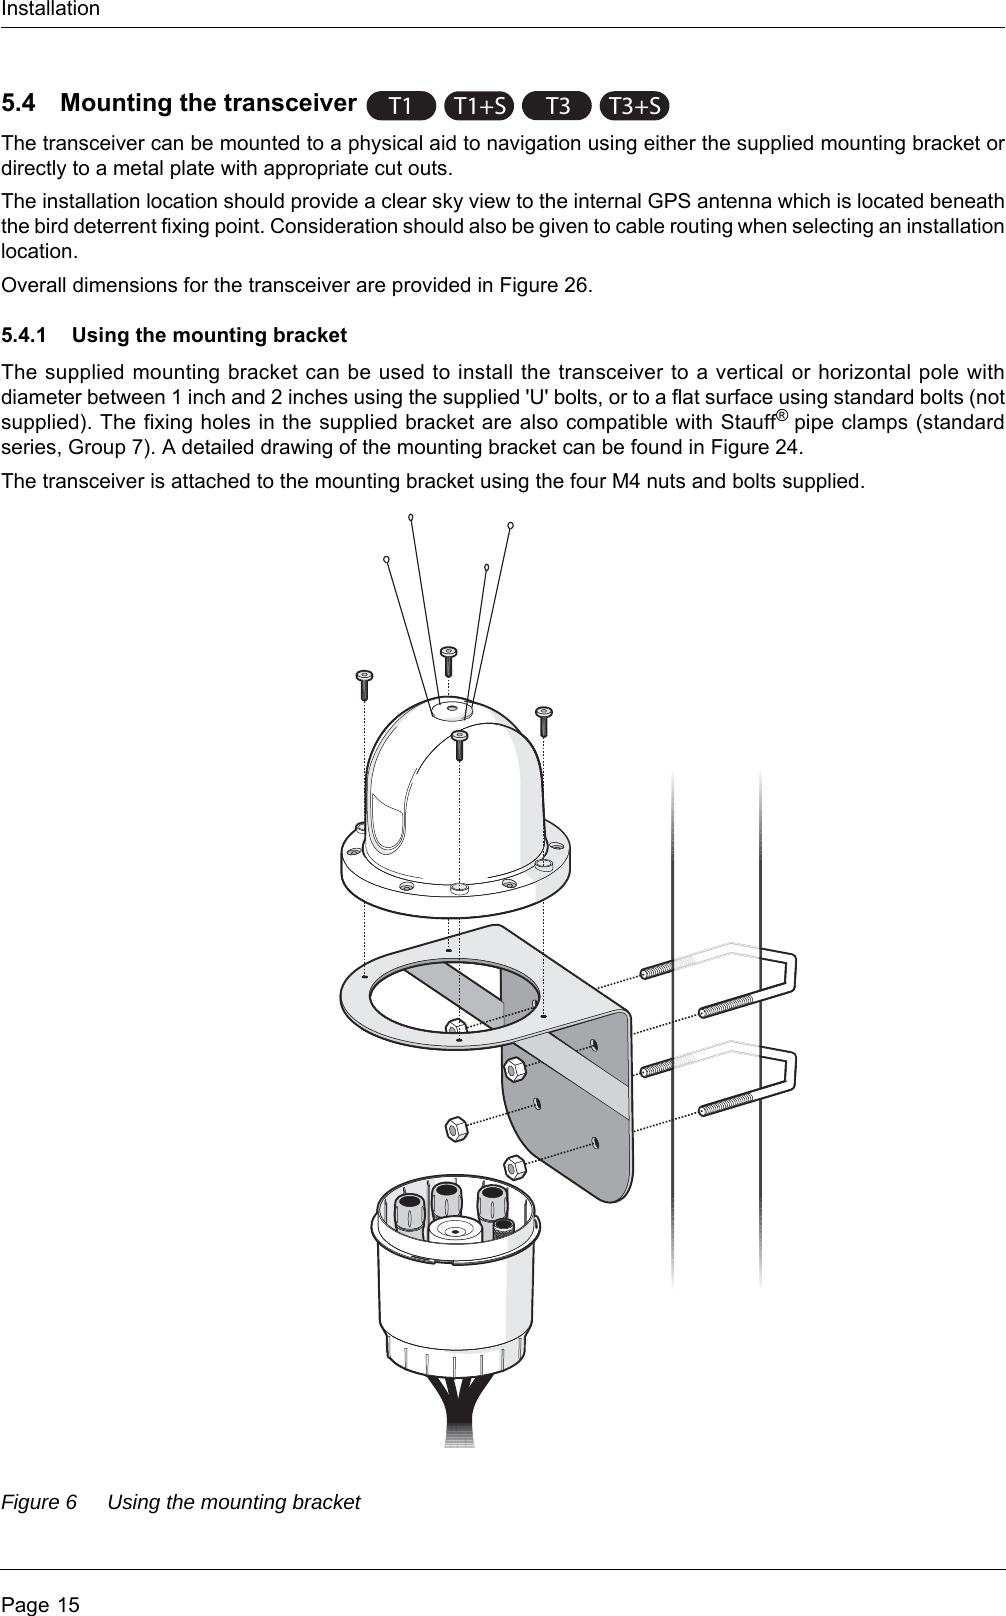 InstallationPage 155.4 Mounting the transceiverThe transceiver can be mounted to a physical aid to navigation using either the supplied mounting bracket or directly to a metal plate with appropriate cut outs. The installation location should provide a clear sky view to the internal GPS antenna which is located beneath the bird deterrent fixing point. Consideration should also be given to cable routing when selecting an installation location.Overall dimensions for the transceiver are provided in Figure 26. 5.4.1 Using the mounting bracketThe supplied mounting bracket can be used to install the transceiver to a vertical or horizontal pole with diameter between 1 inch and 2 inches using the supplied &apos;U&apos; bolts, or to a flat surface using standard bolts (not supplied). The fixing holes in the supplied bracket are also compatible with Stauff® pipe clamps (standard series, Group 7). A detailed drawing of the mounting bracket can be found in Figure 24.The transceiver is attached to the mounting bracket using the four M4 nuts and bolts supplied.Figure 6 Using the mounting bracketT1 T1+ST3T3+S